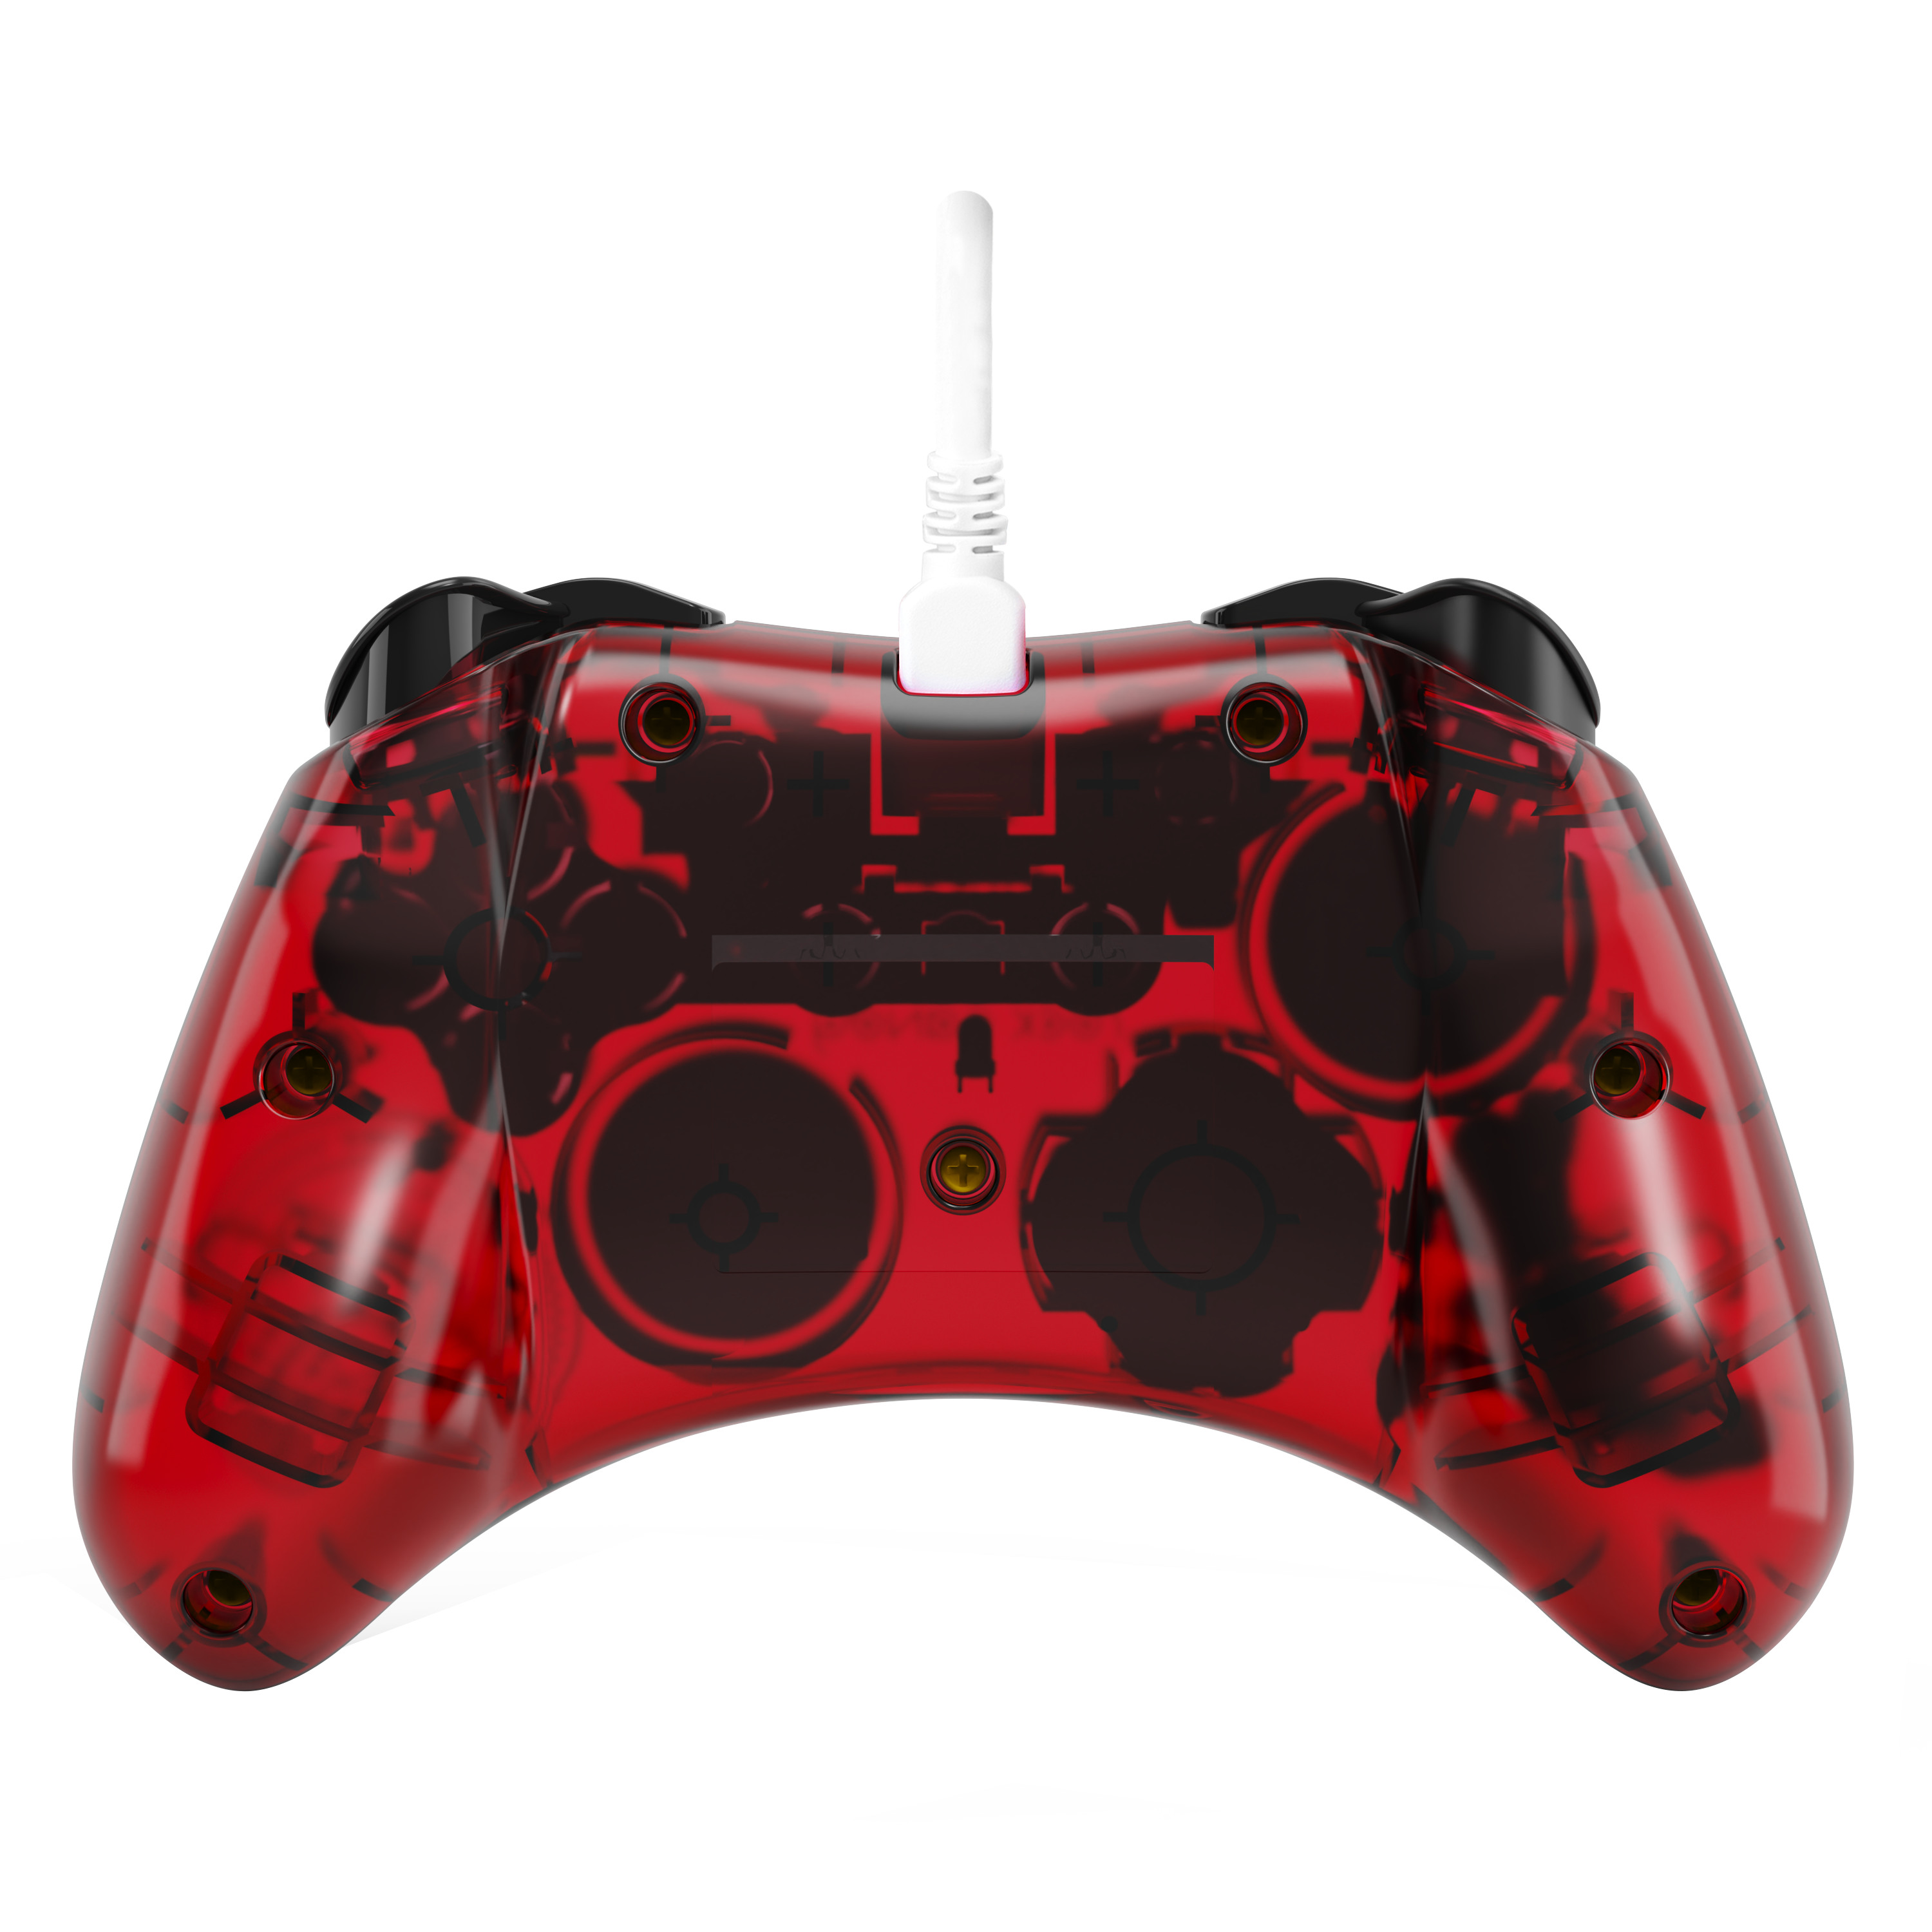 PDP Rock Candy Wired Controller 500-181-MAKT NSW, Mario Kart